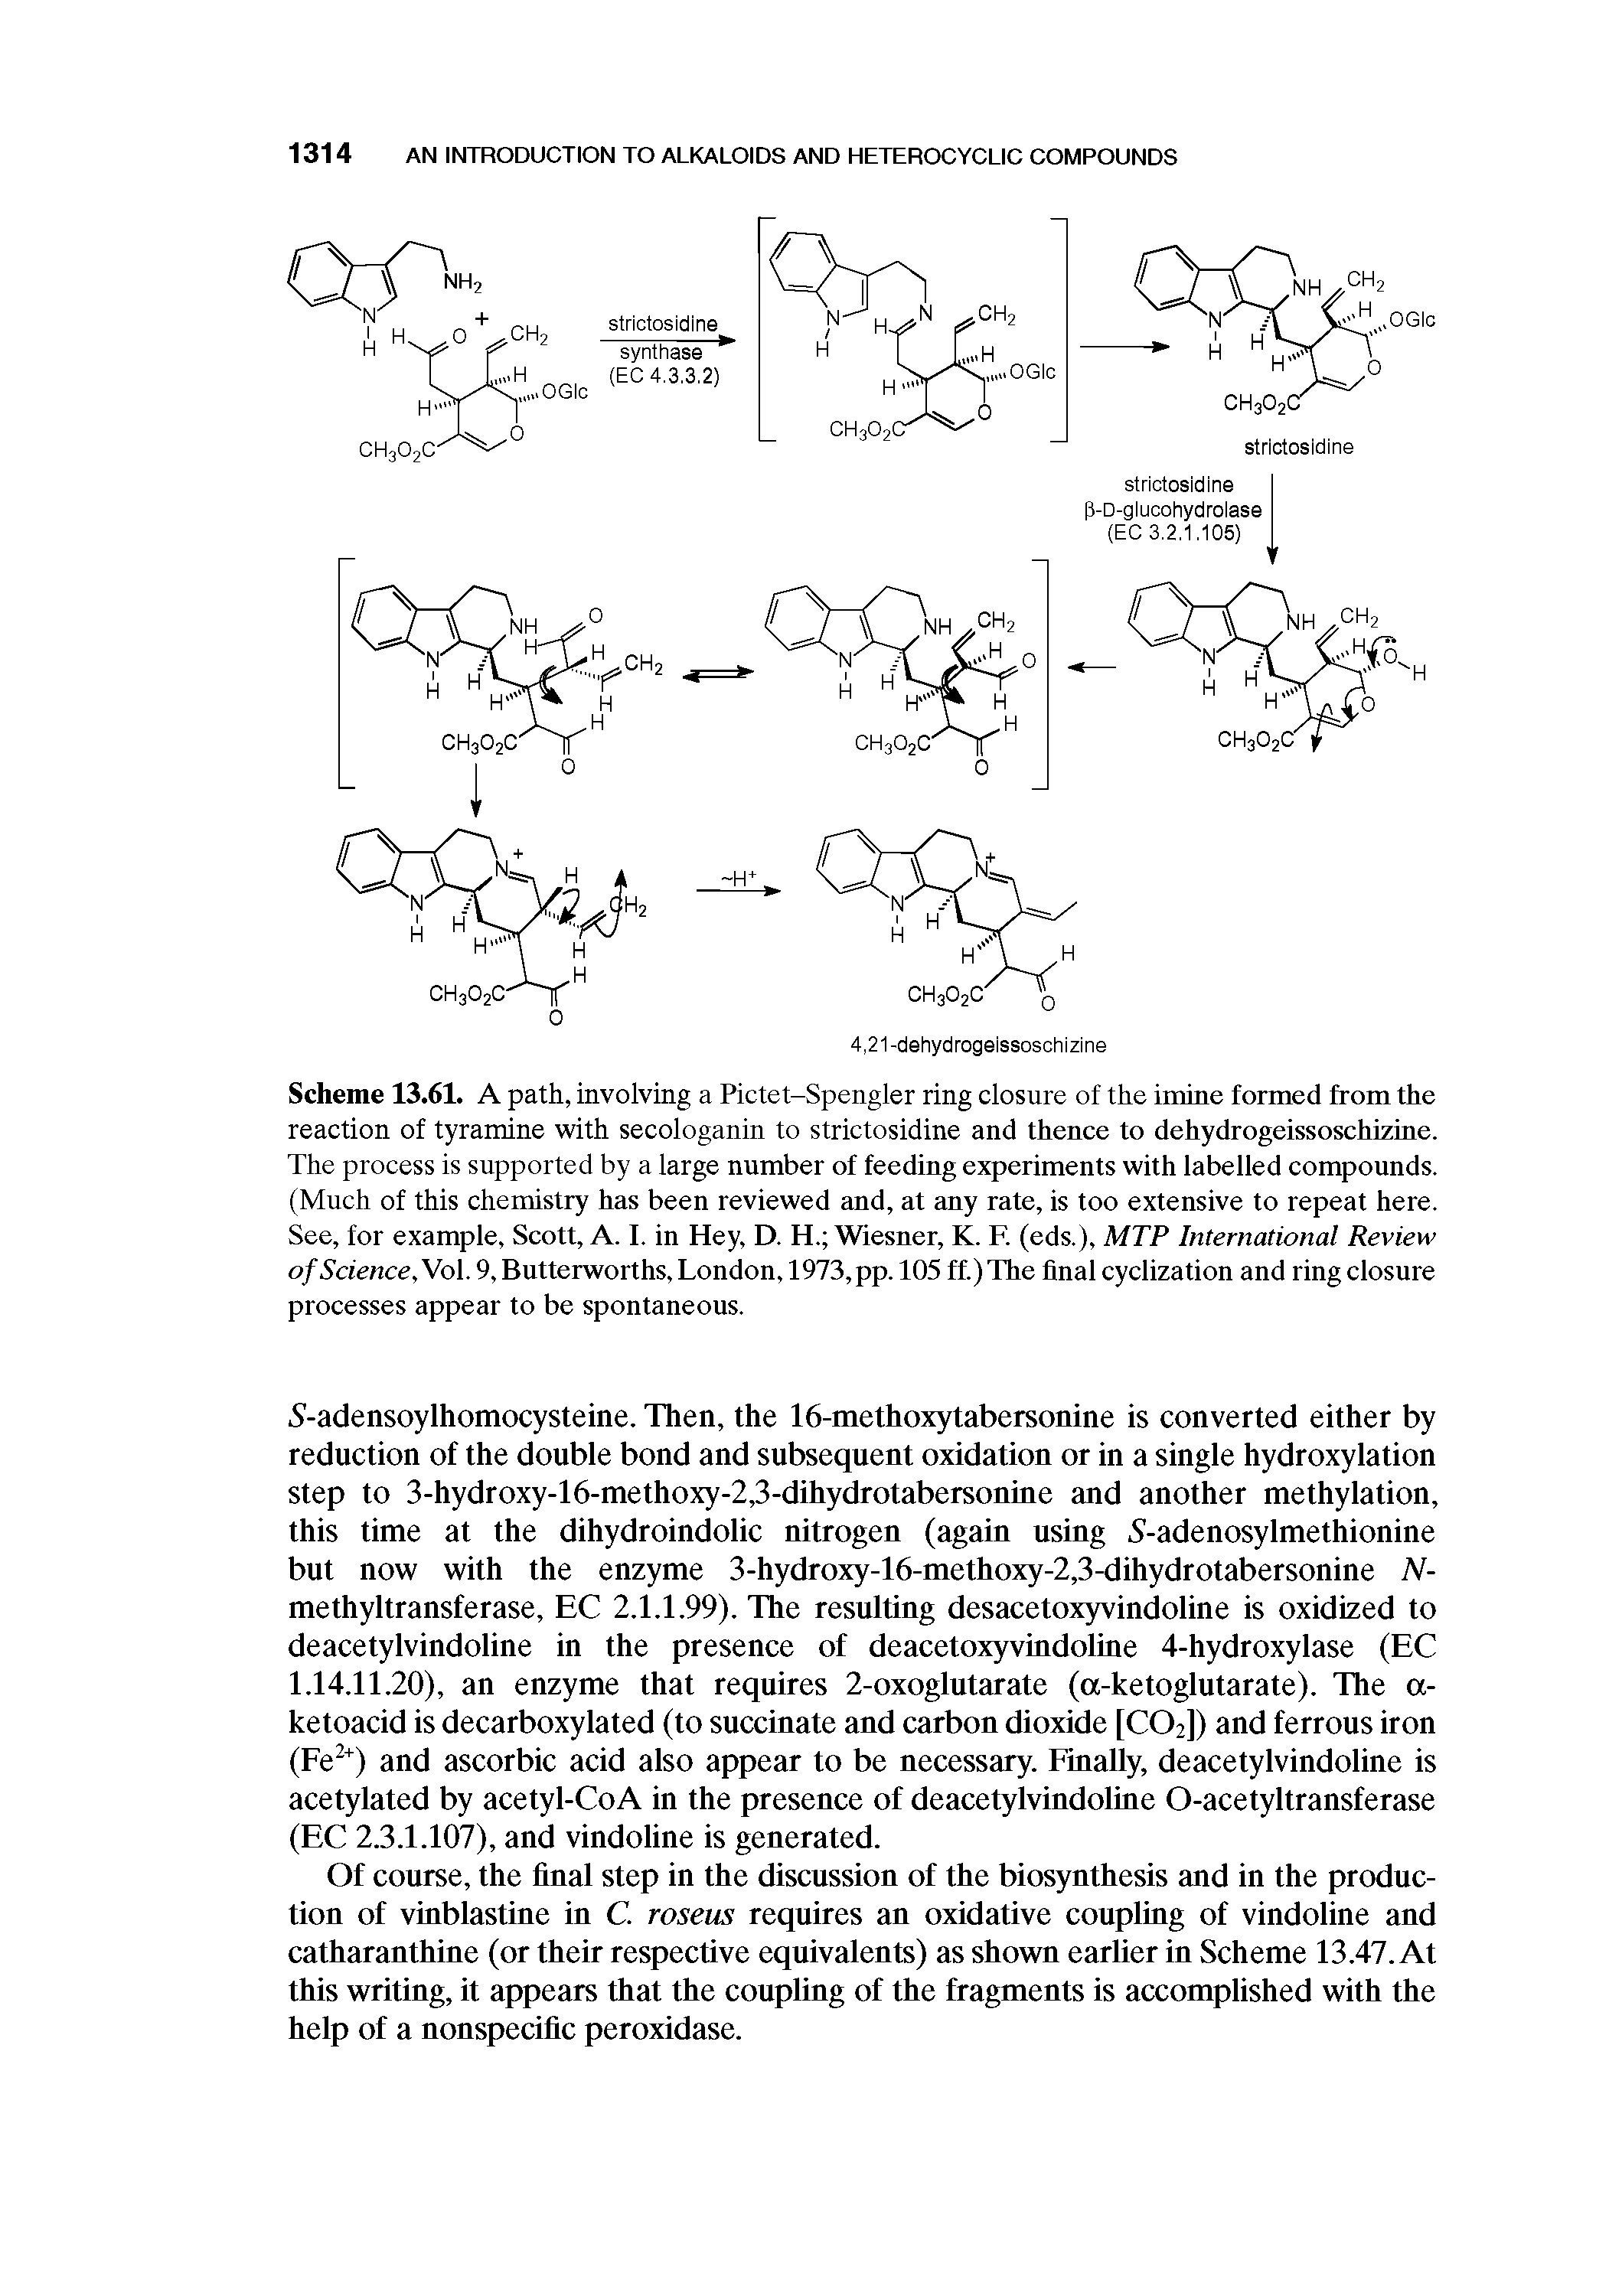 Scheme 13.61. A path, involving a Pictet-Spengler ring closure of the imiue formed from the reaction of tyramine with secologanin to strictosidine and thence to dehydrogeissoschizine. The process is supported by a large number of feeding experiments with labelled compounds. (Much of this chemistry has been reviewed and, at any rate, is too extensive to repeat here. See, for example, Scott, A. I. in Hey, D. H. Wiesner, K. F. (eds.), MTP International Review ofScience Vol. 9, Butterworths, London, 1973,pp. 105 ft) The final cyclization and ring closure processes appear to be spontaneous.